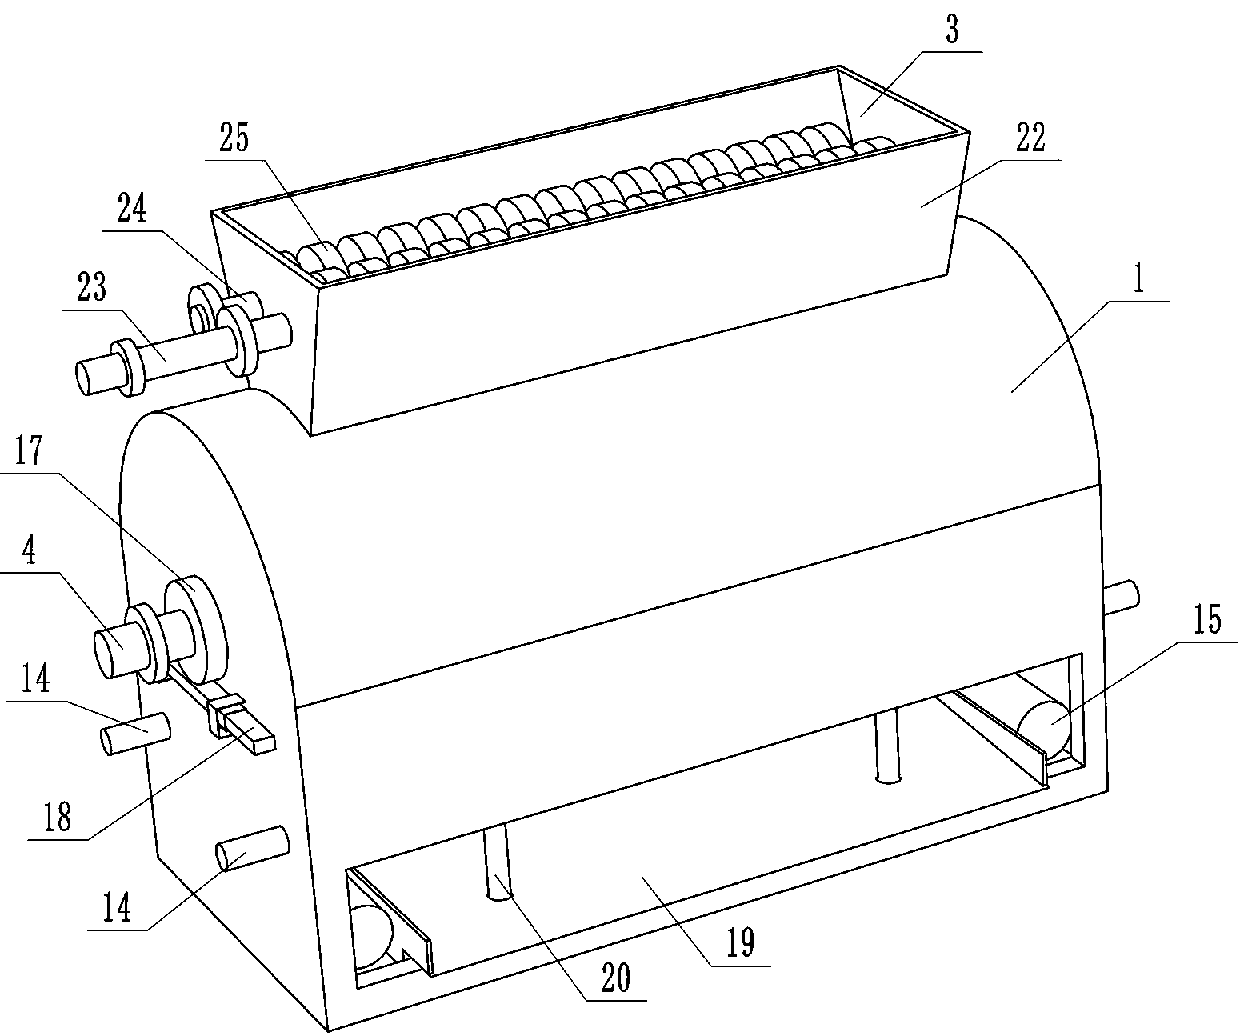 A kind of reverse blowing rubber high-efficiency crushing device